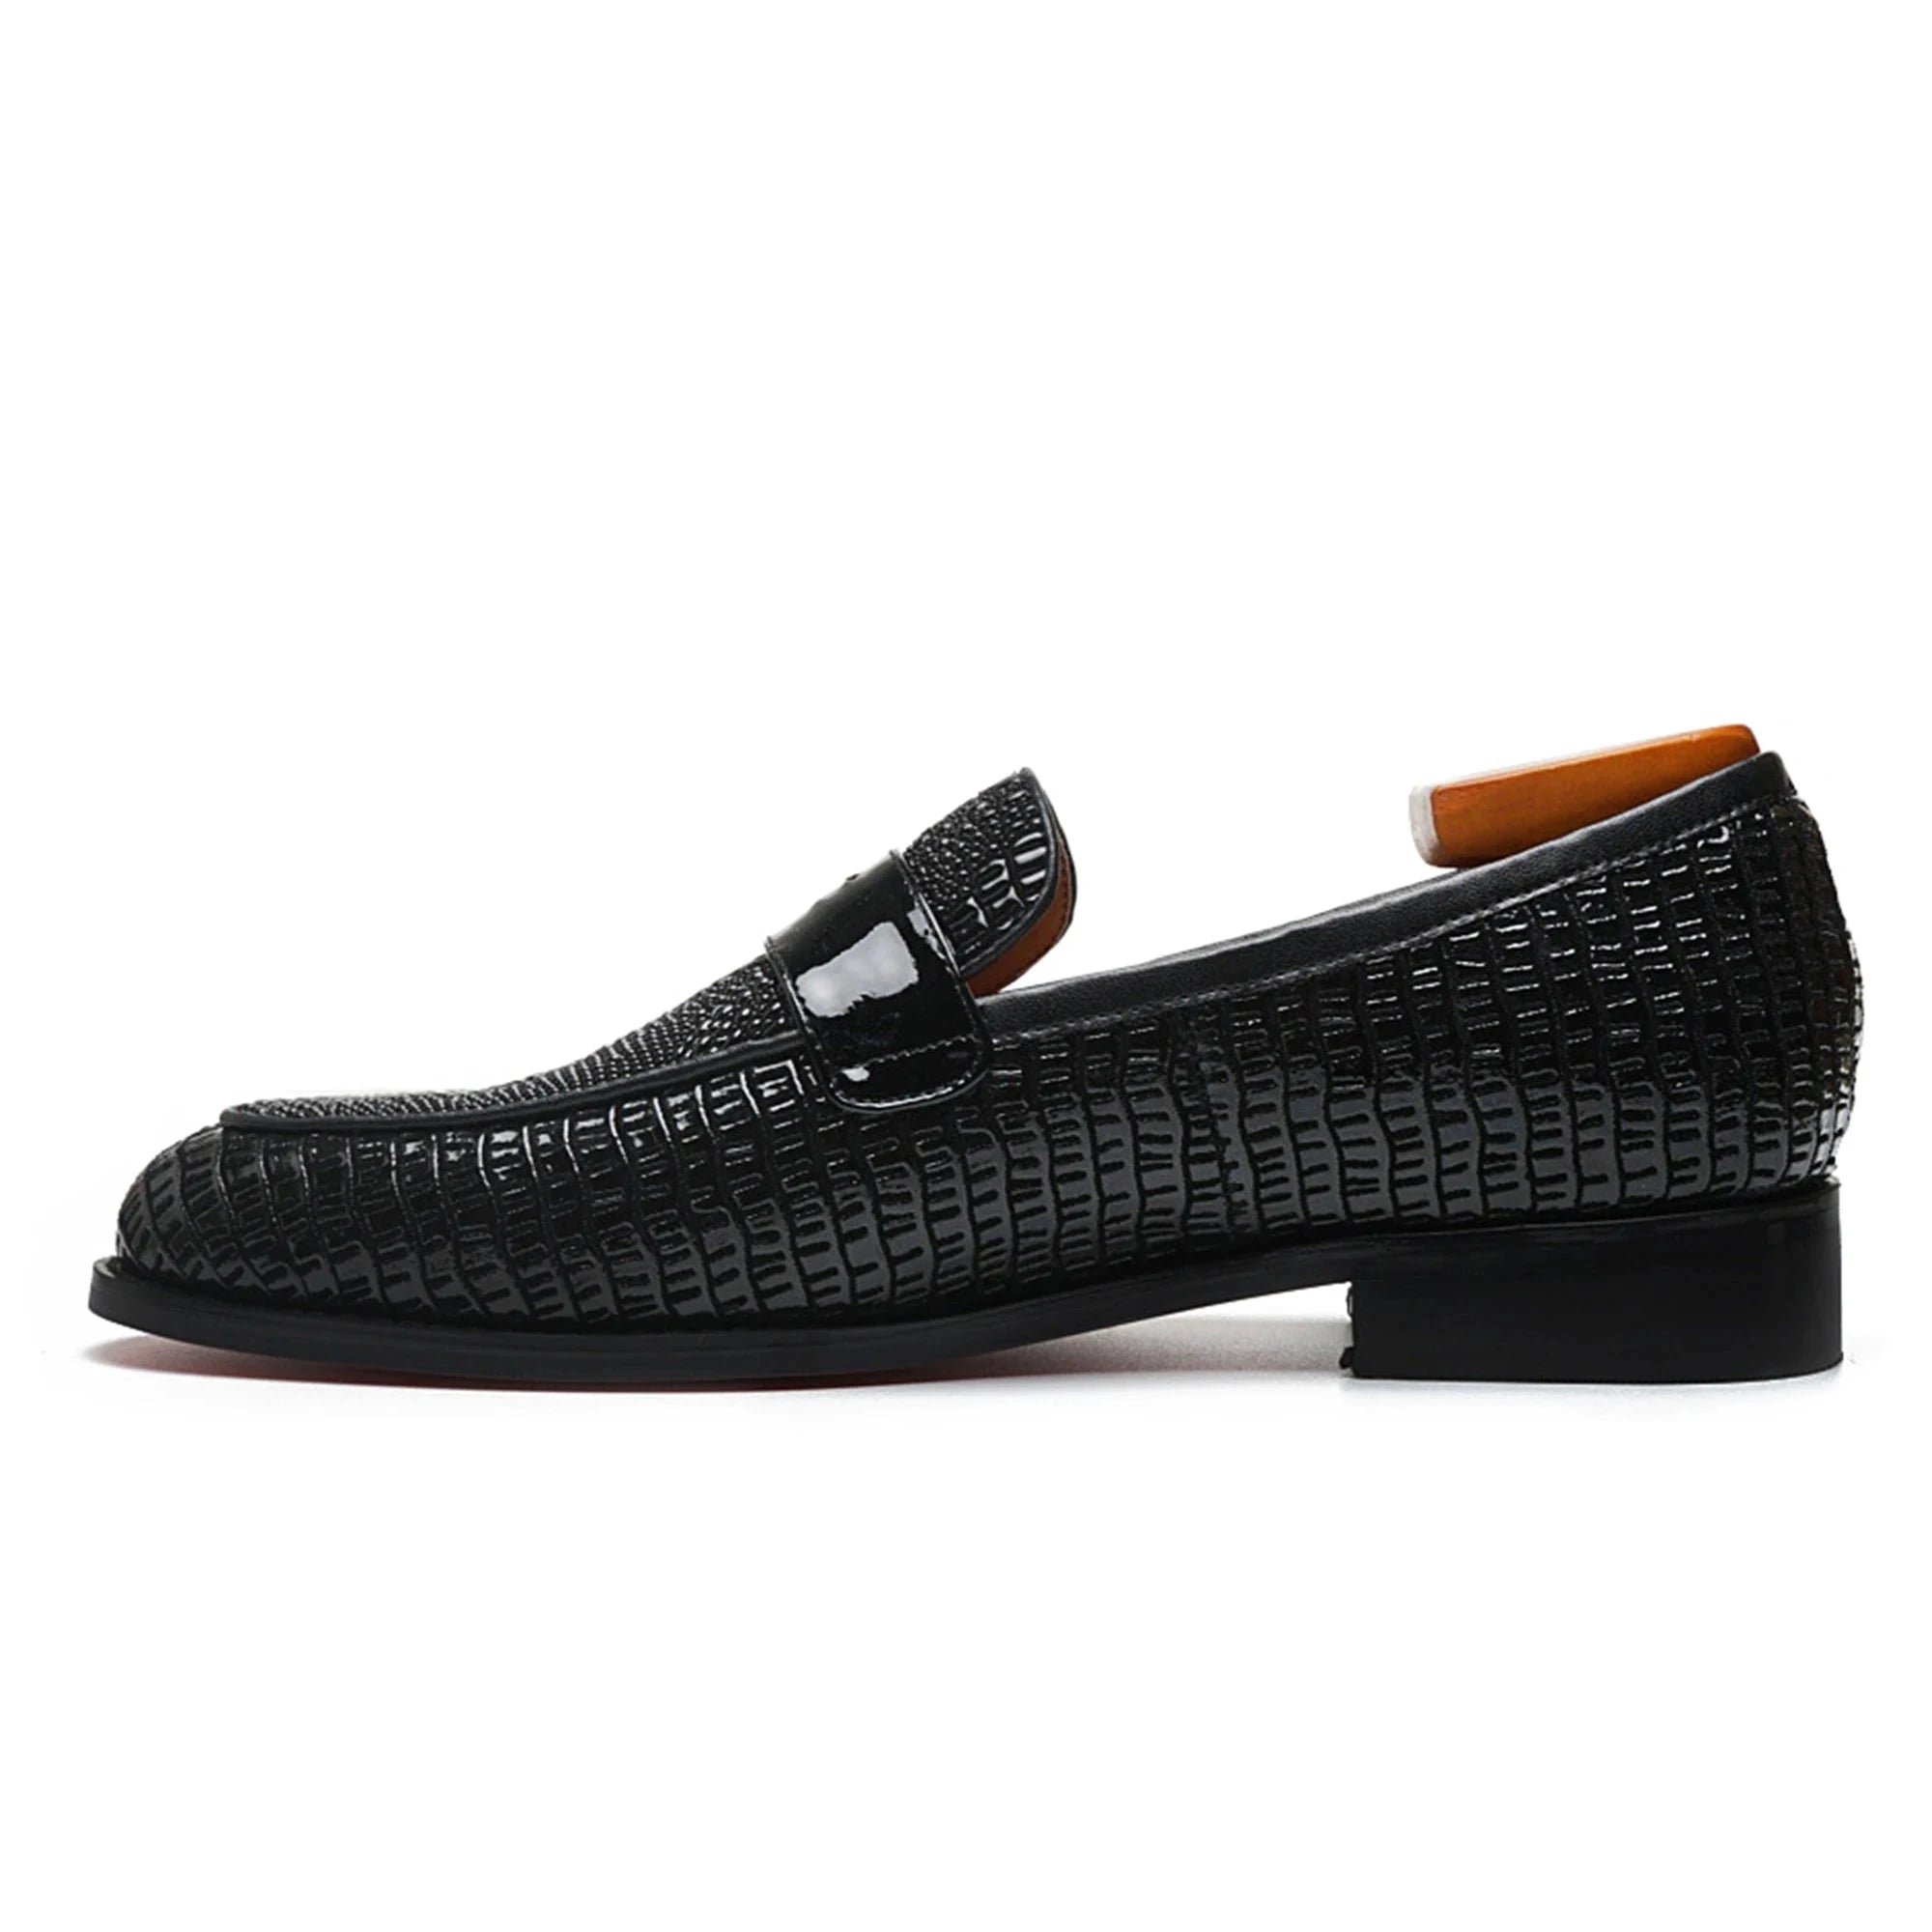 luxury leather loafers for men - red bottom